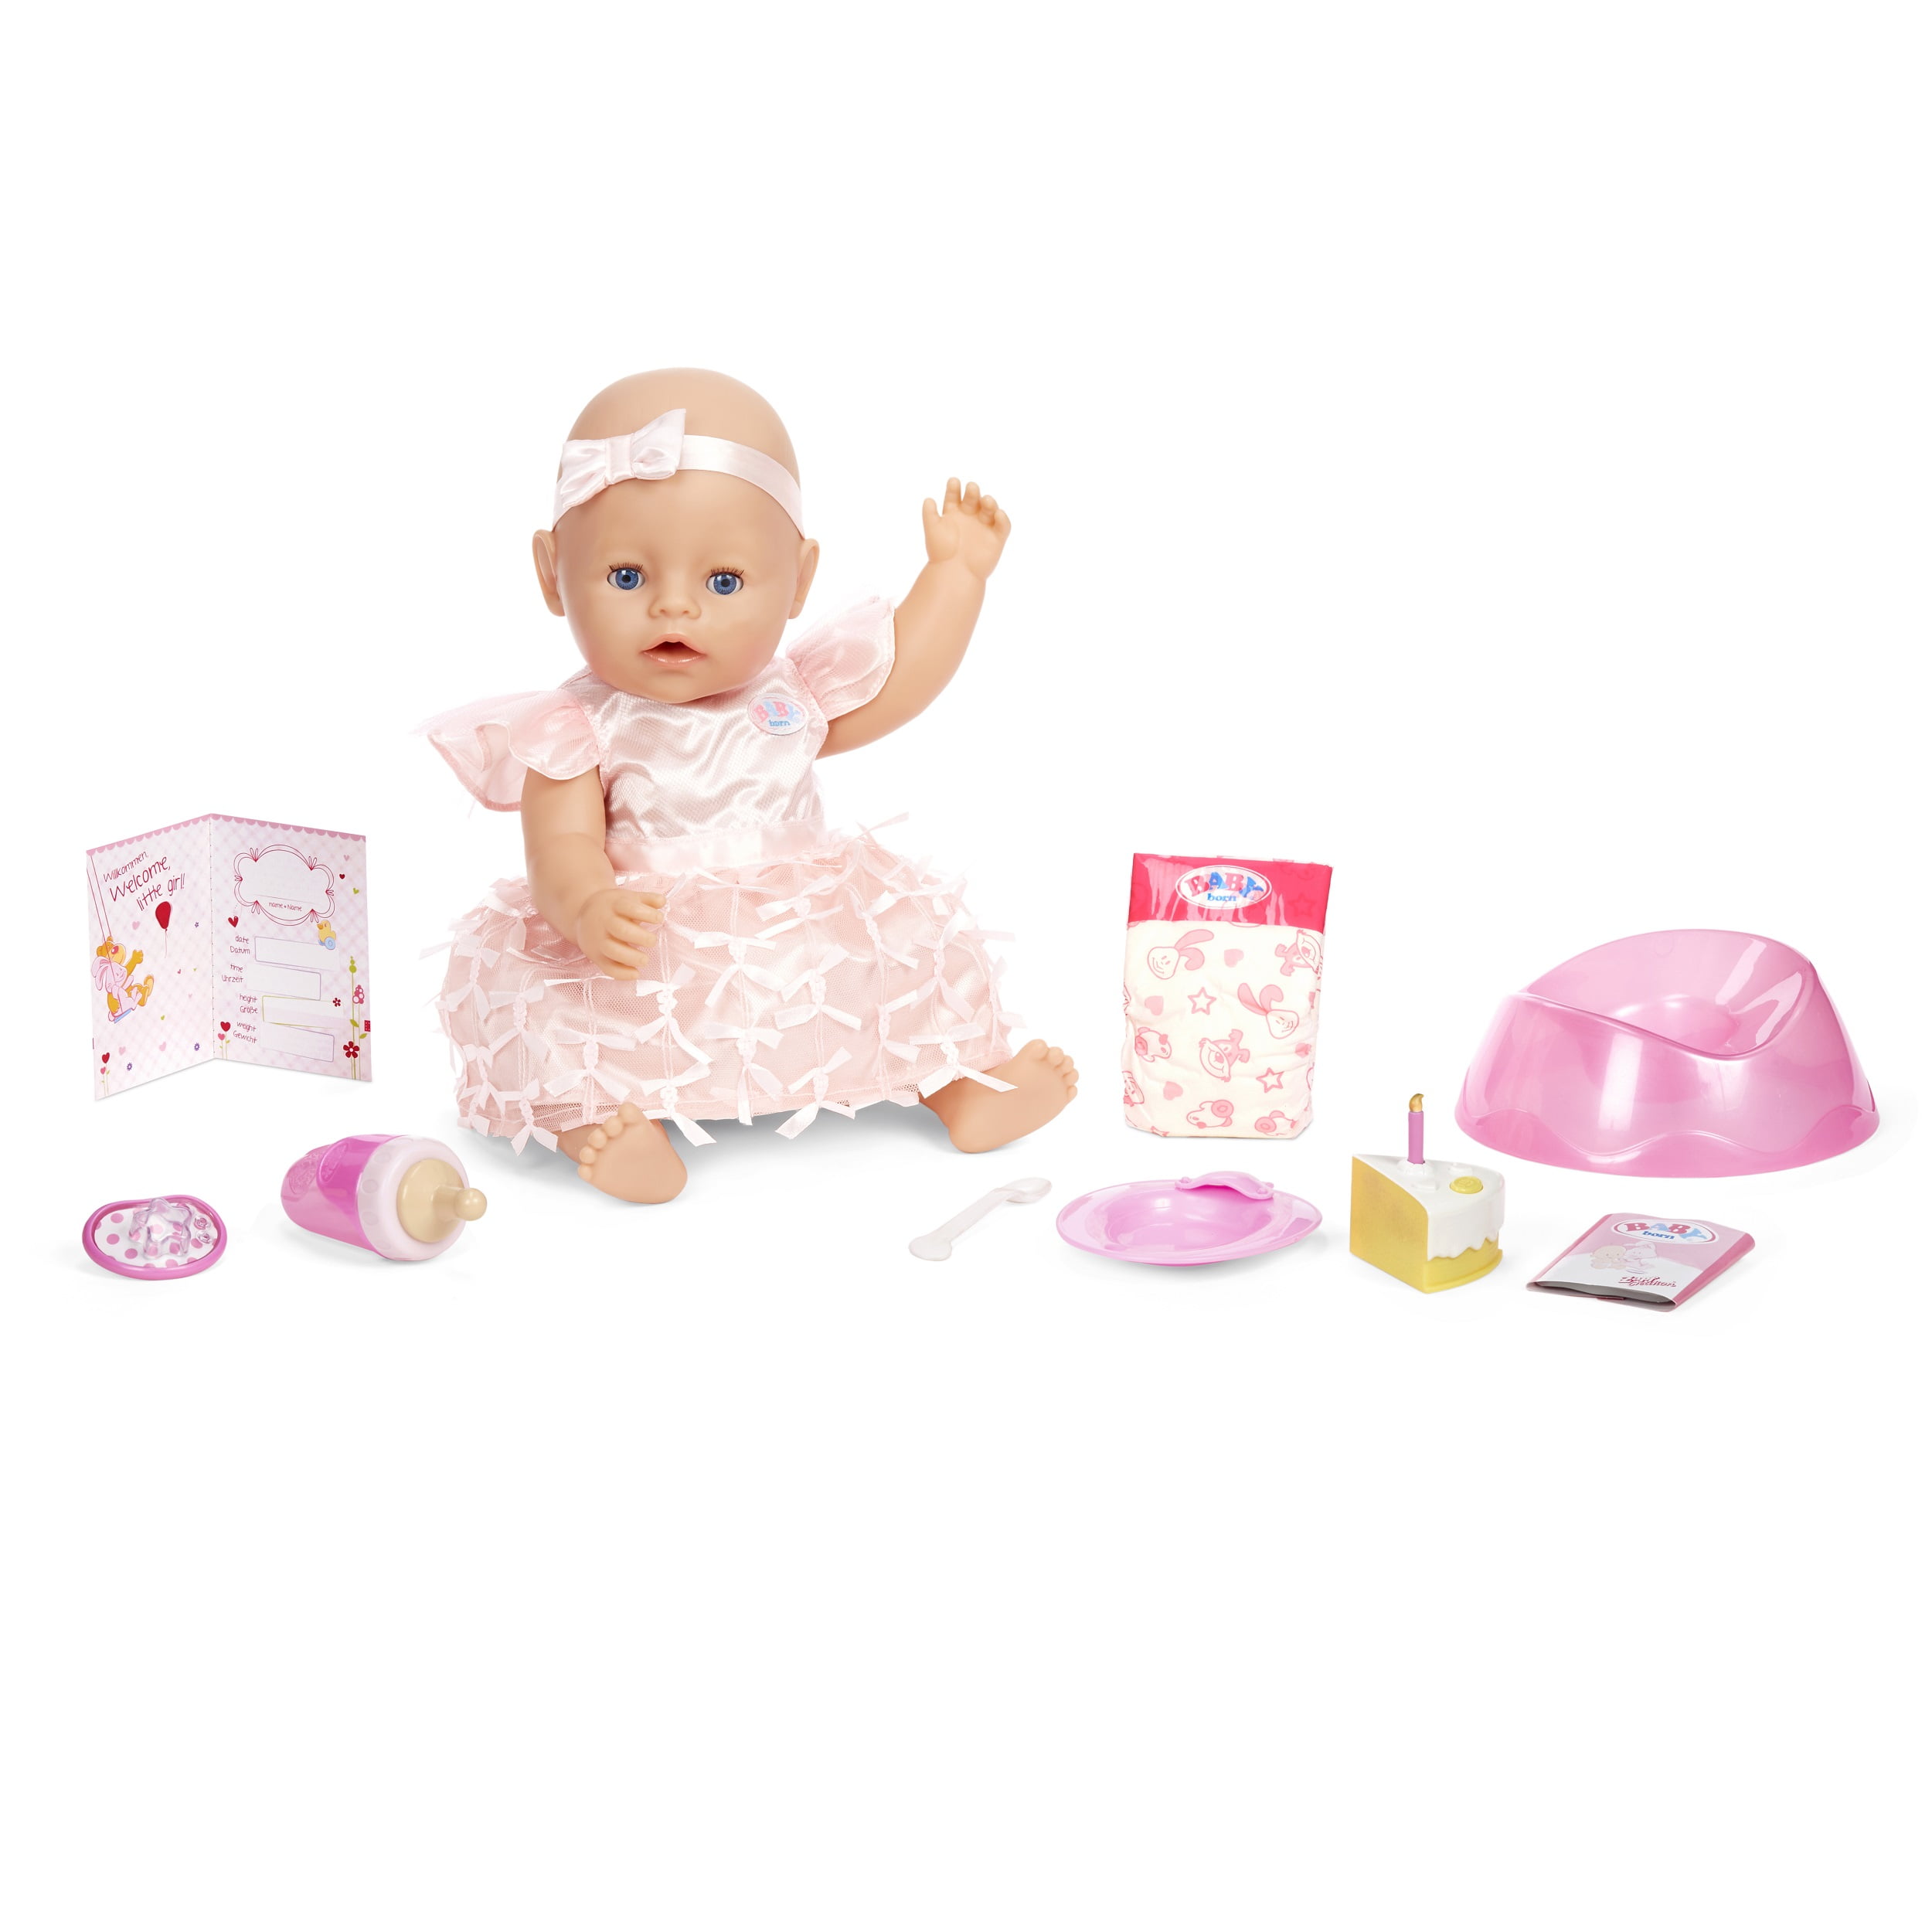 Baby Born Interactive Baby Party Theme, Blue Eyes, 9 Ways to Nurture (Eats, Drinks, Cries, Sleeps, Bathes, and Wets), Toys for Toddlers and Preschool Girls and Boys 2 3 4+ - Walmart.com